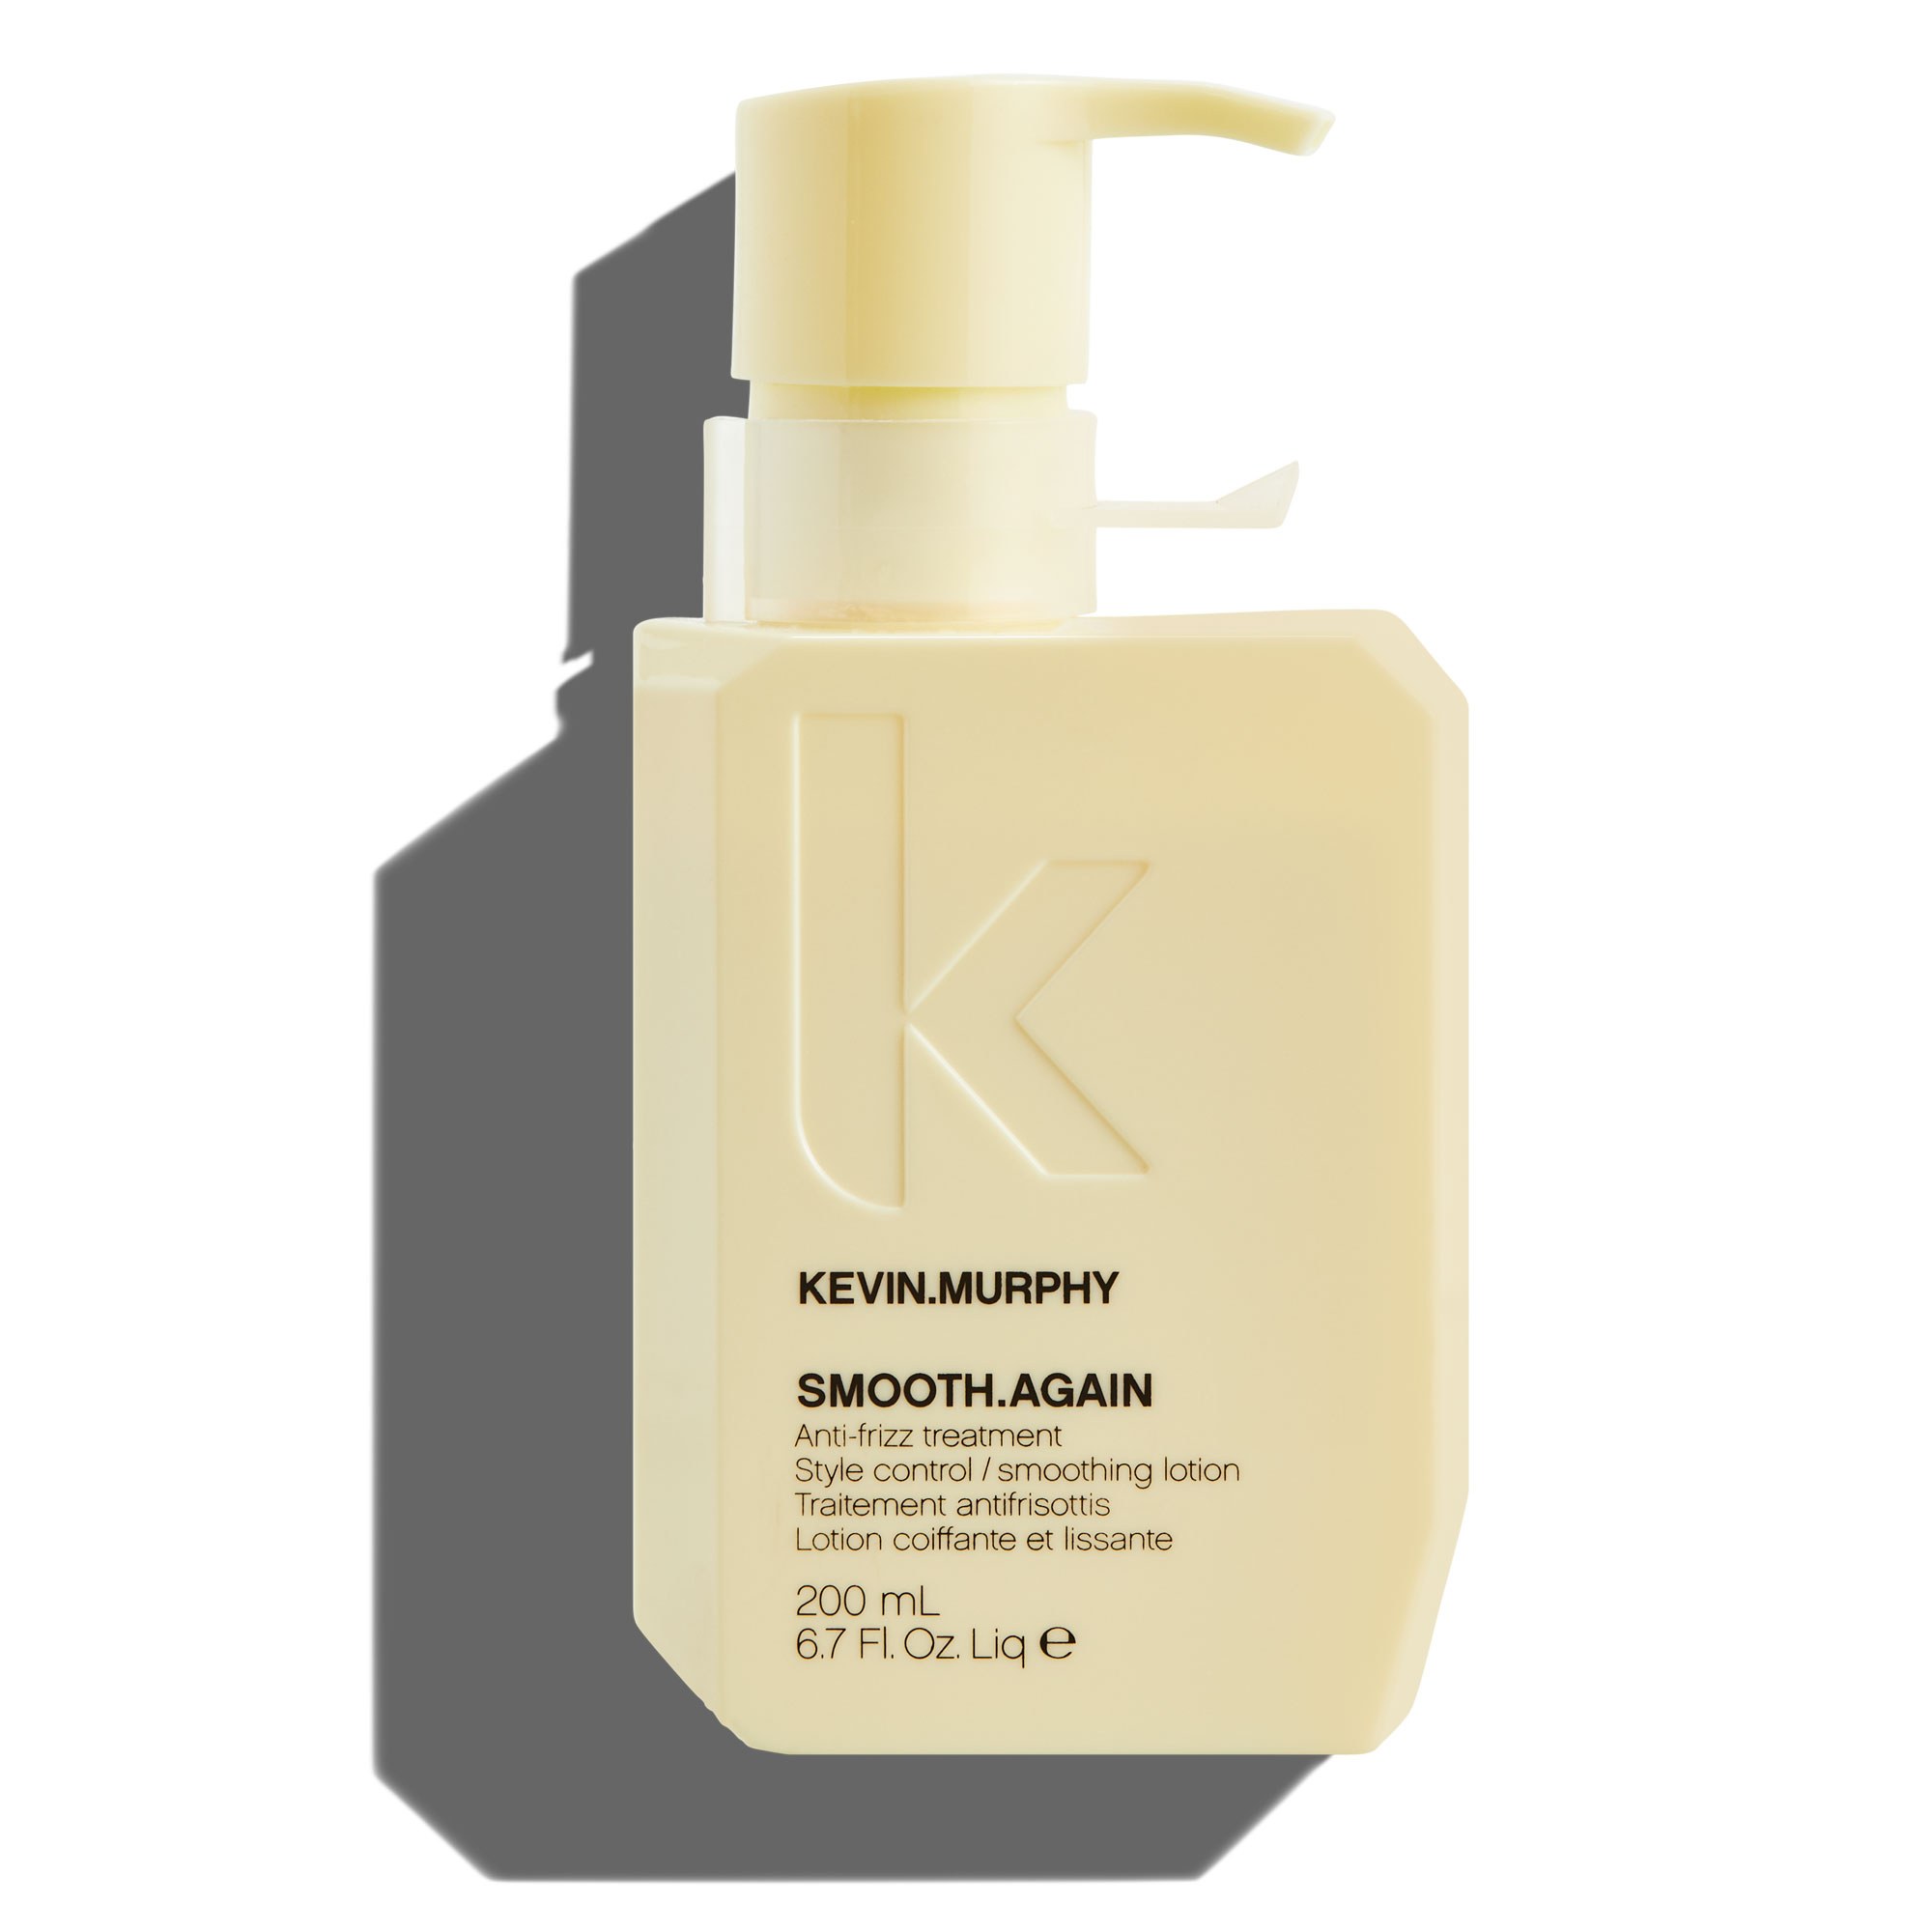 KEVIN.MURPHY SMOOTH.AGAIN Treatment